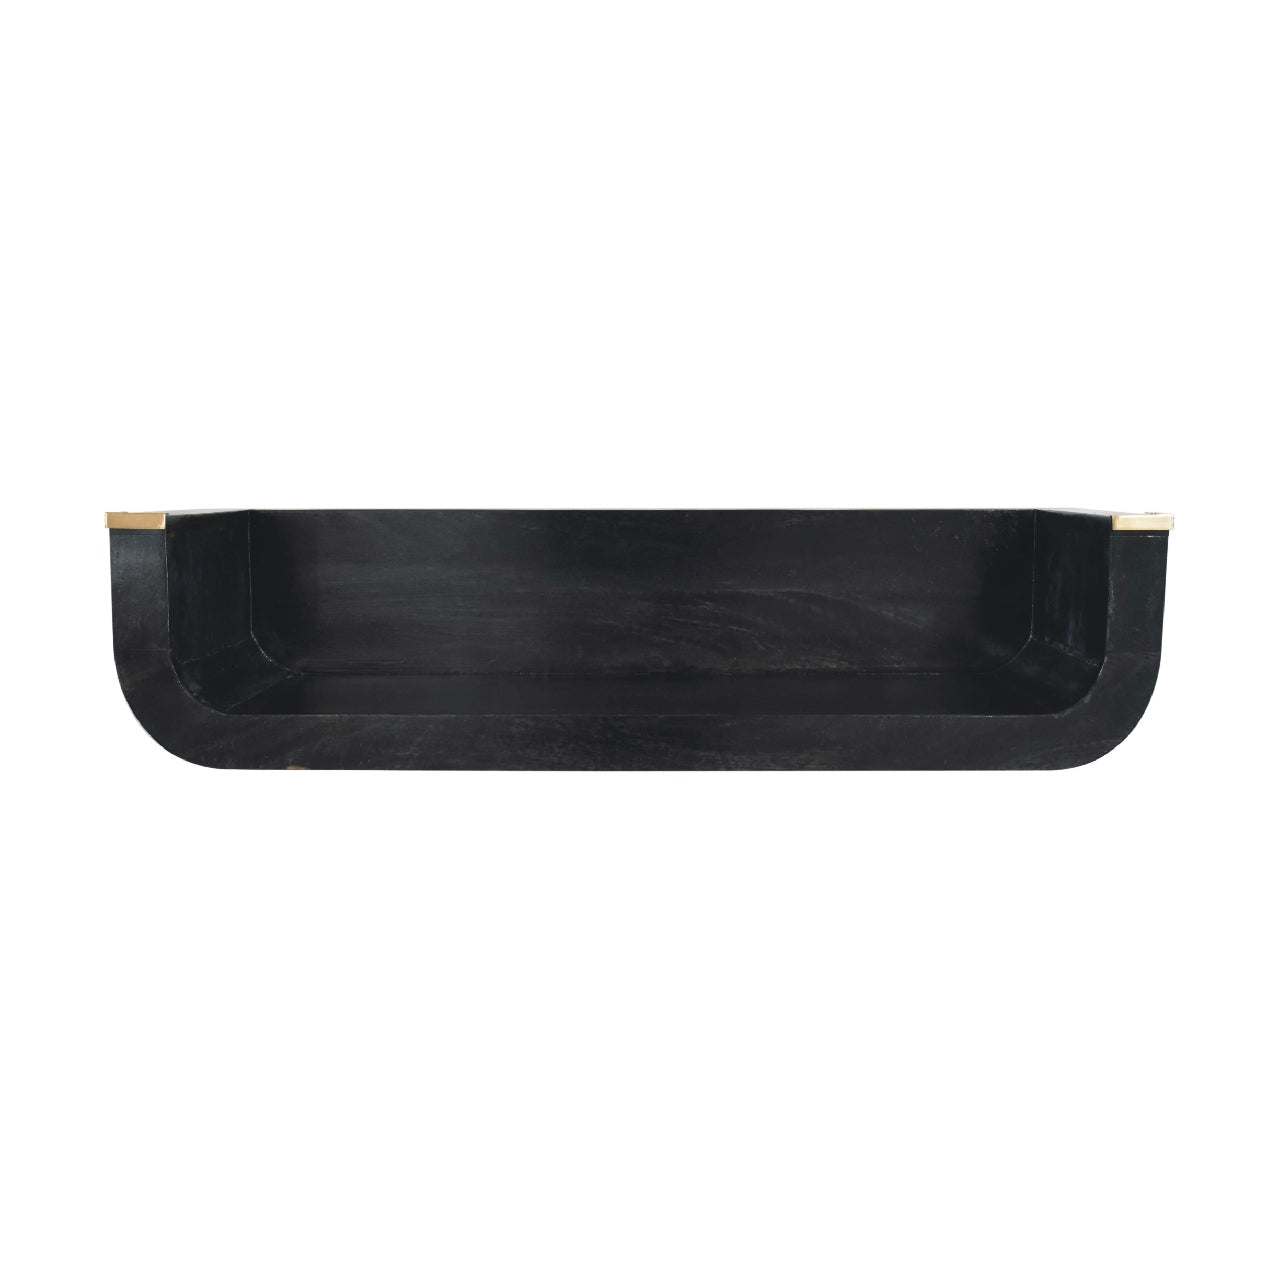 View Indira Ash Black Floating Console Table information